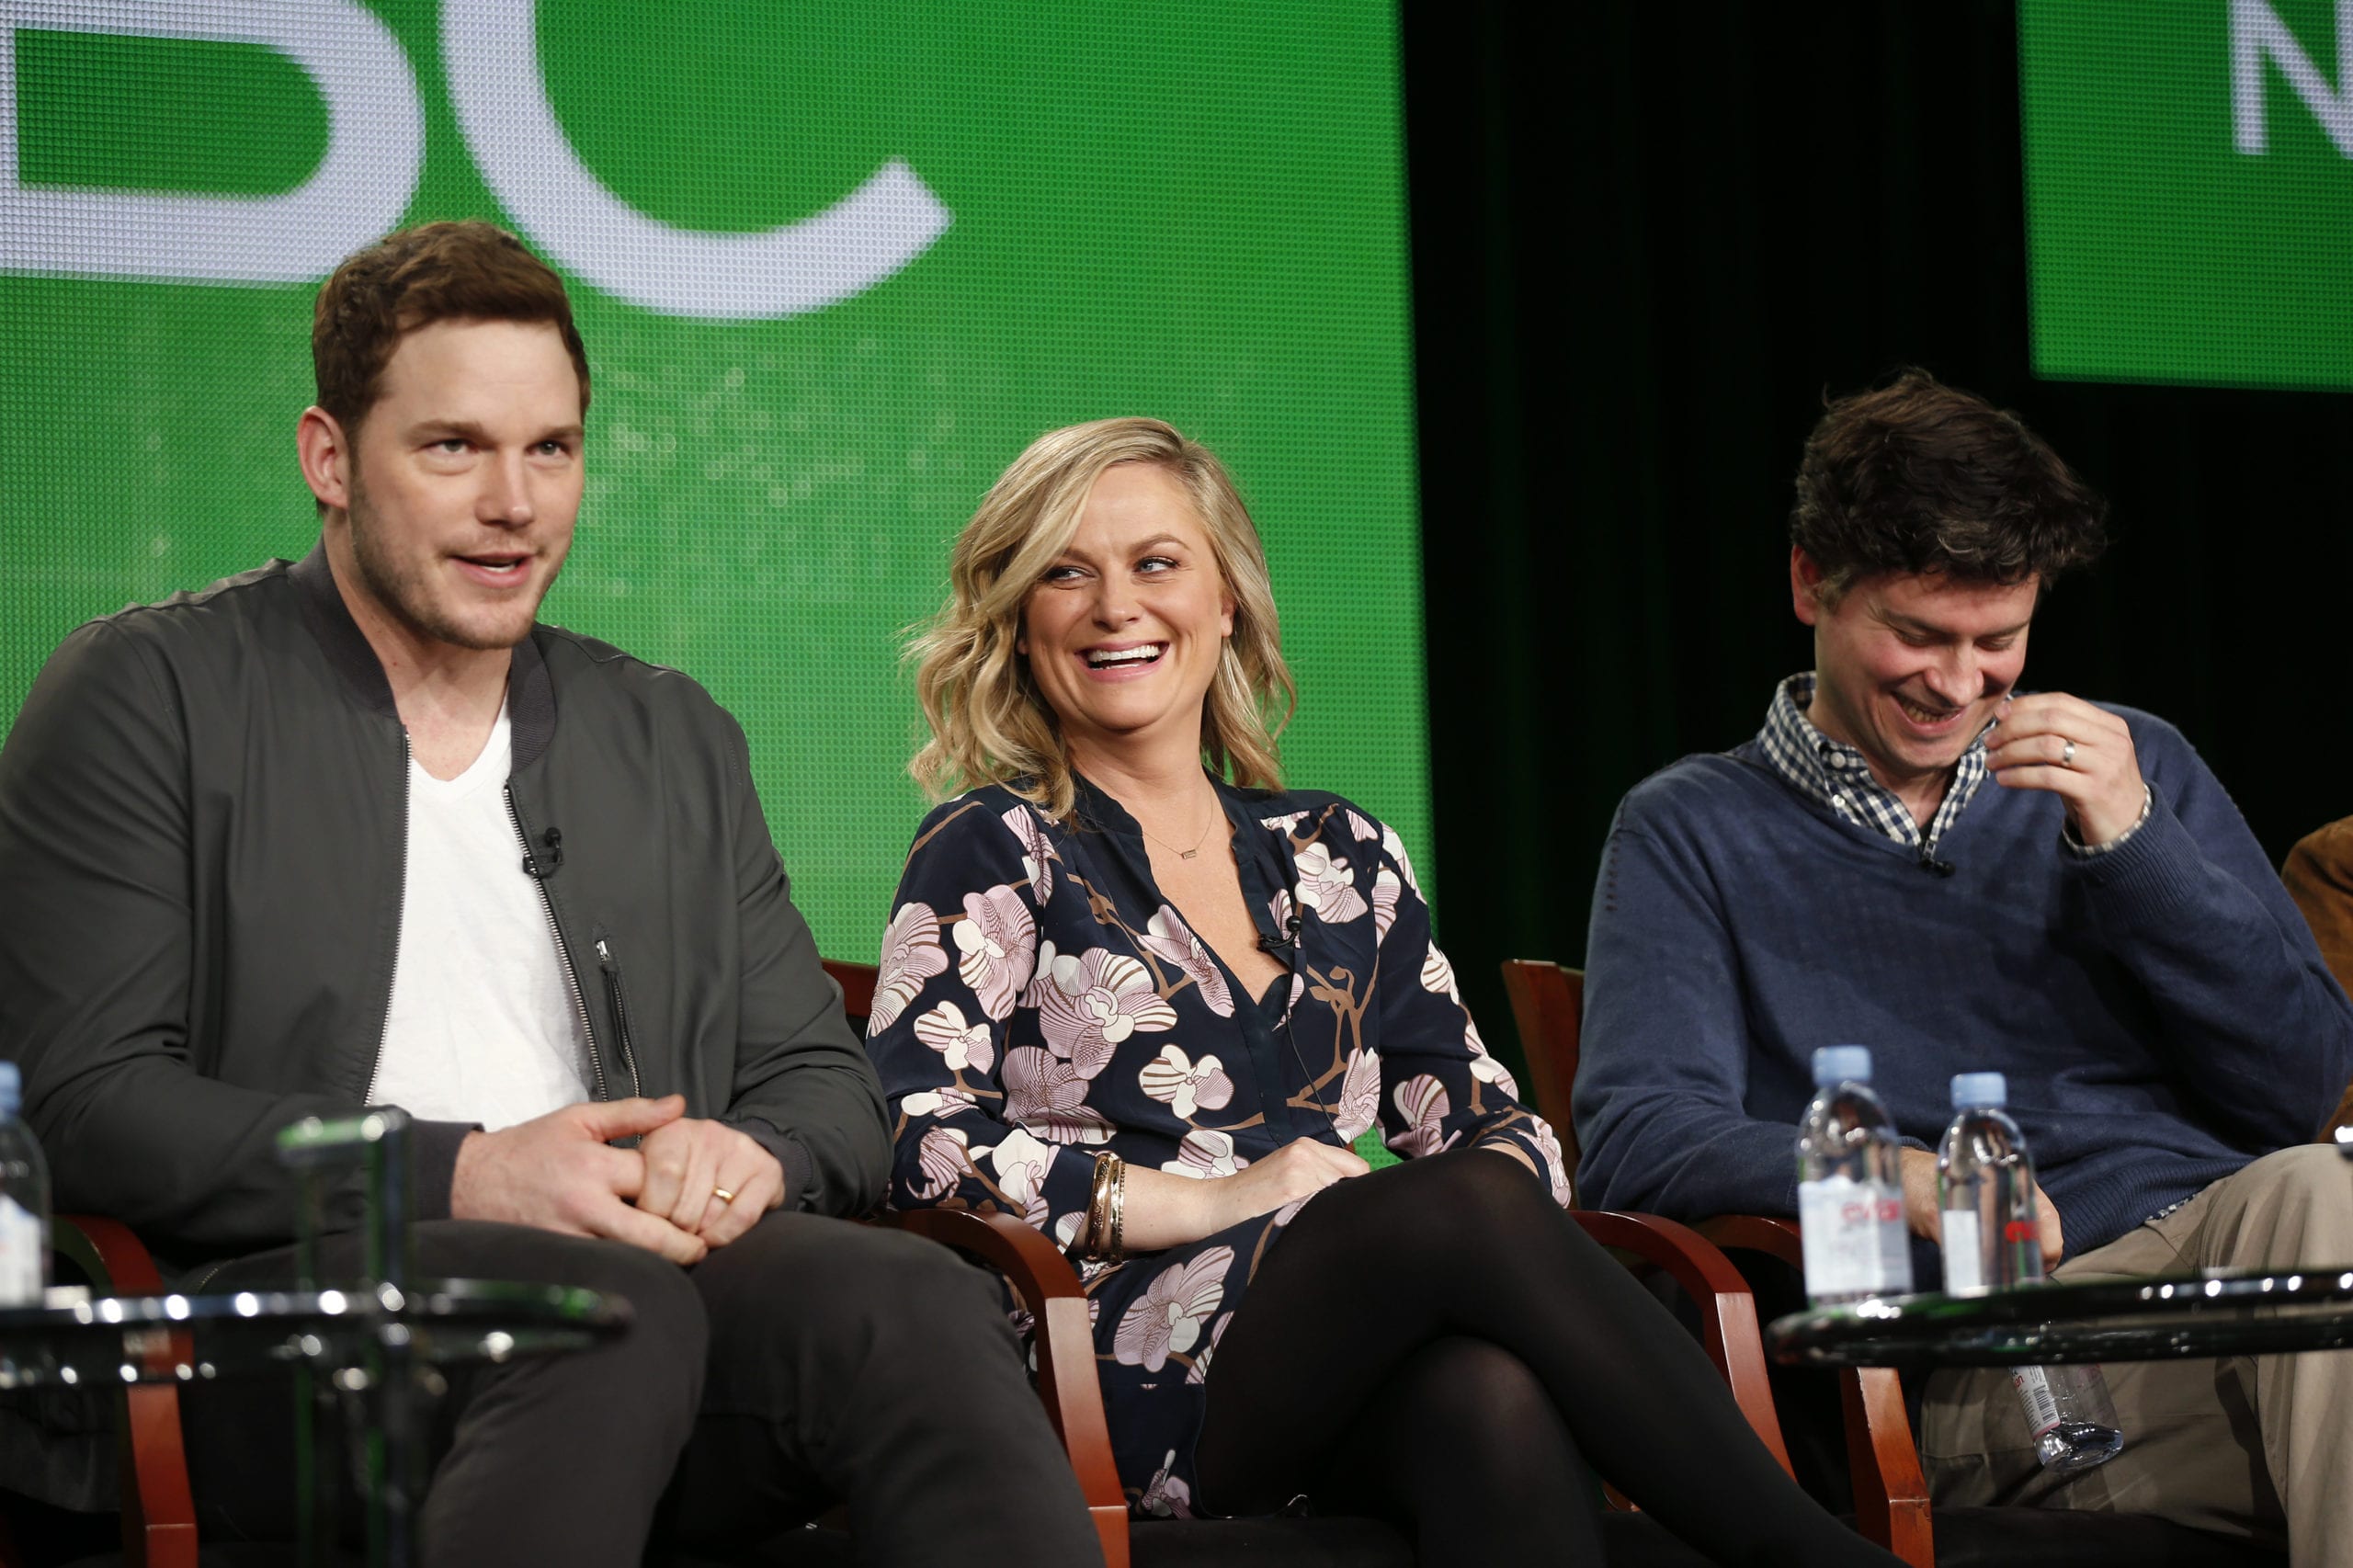 Actors Chris Pratt and Amy Poehler, and producer Mike Schur (L-R) speak about the NBC television show "Parks and Recreation" during the TCA presentations in Pasadena, California, January 16, 2015. REUTERS/Lucy Nicholson   (UNITED STATES - Tags: ENTERTAINMENT) - GM1EB1H0RLJ01